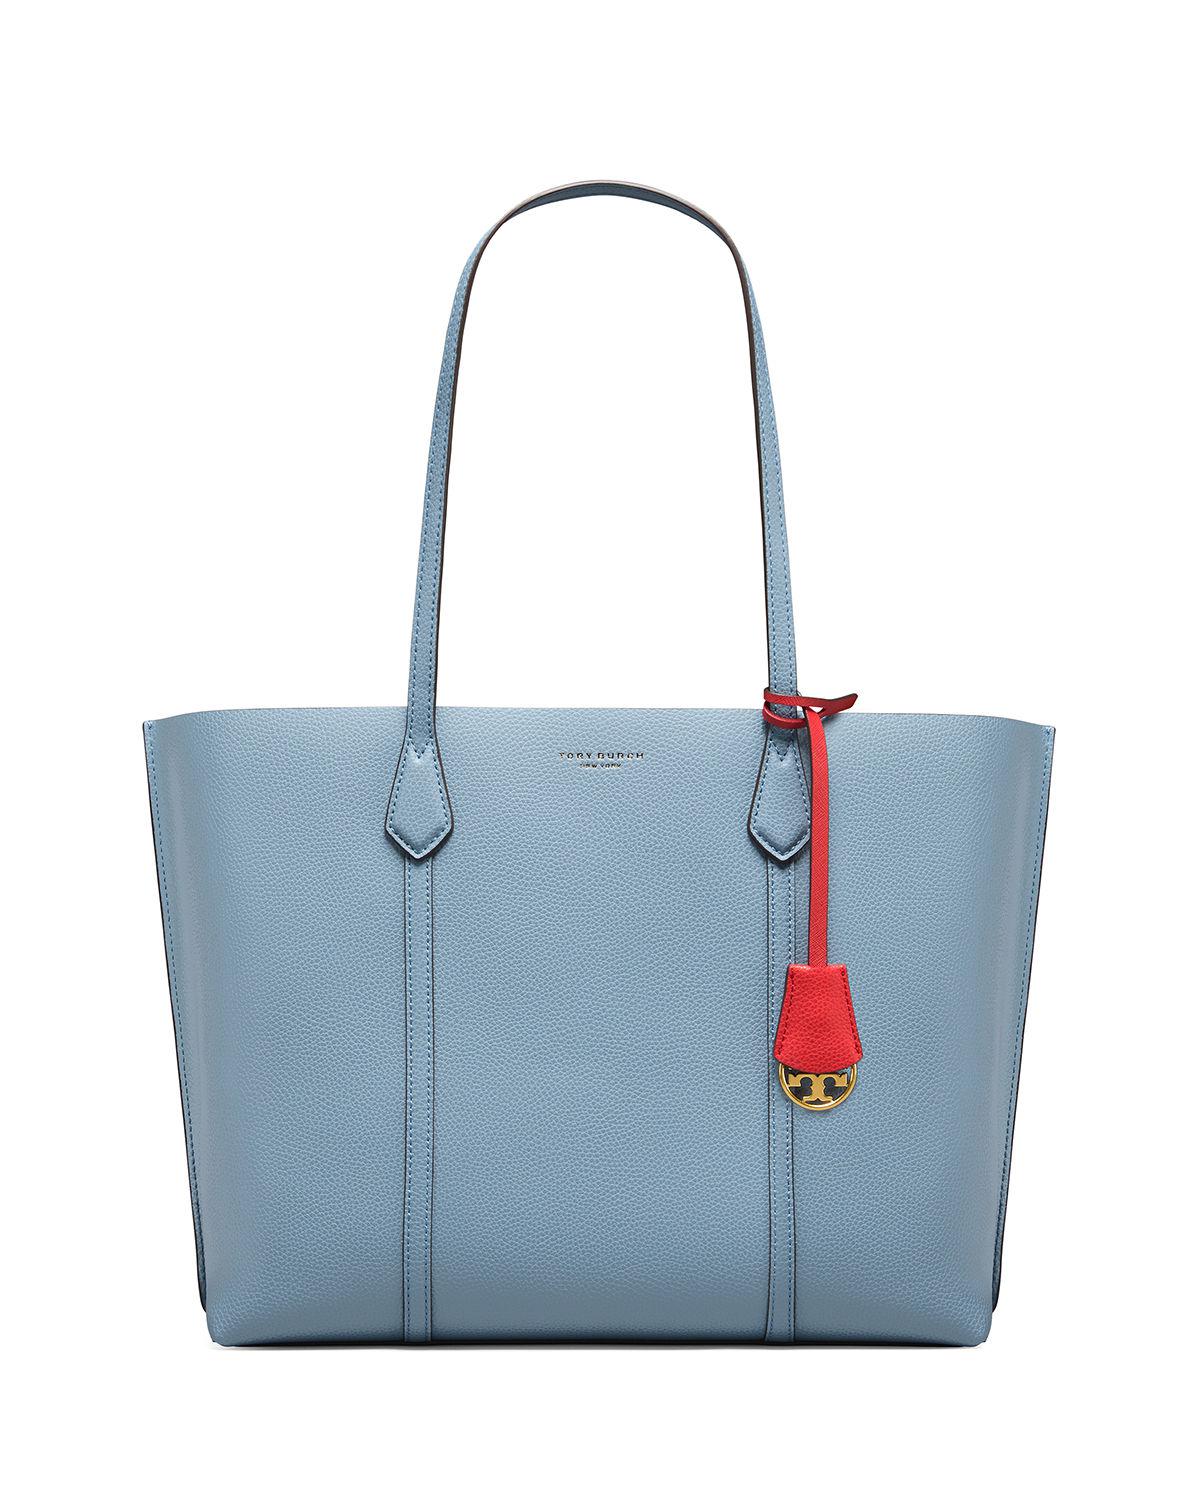 Totes bags Tory Burch - Perry triple compartment light blue tote